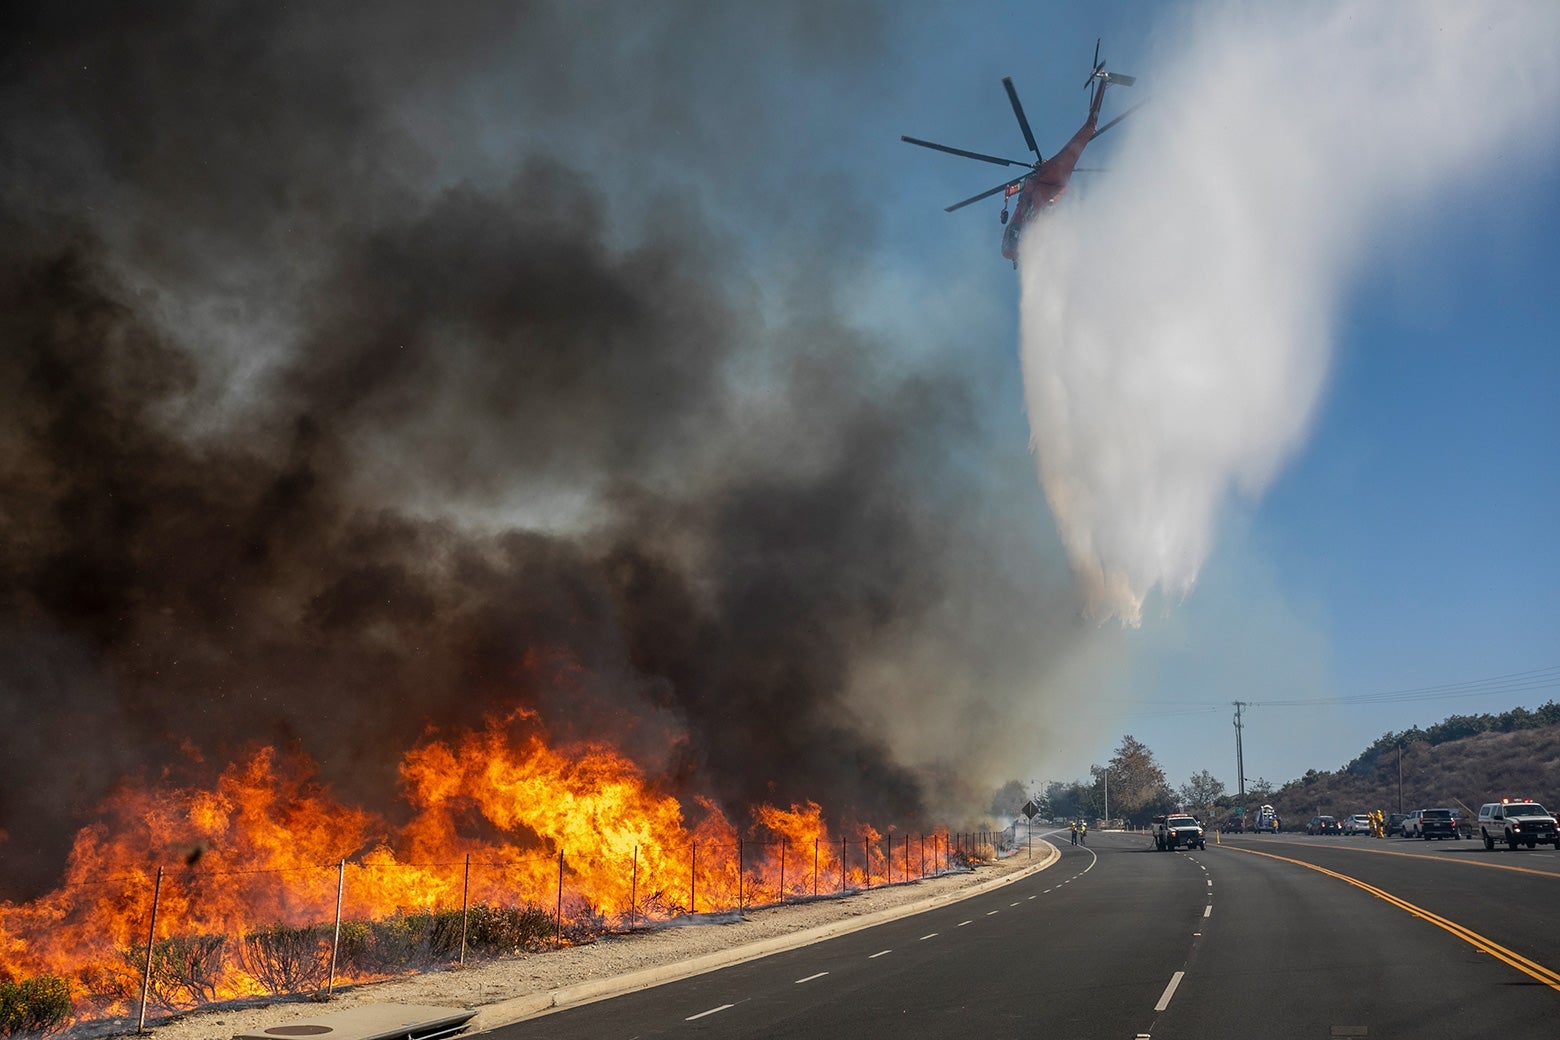 A helicopter drops water near a fire that is raging on the side of a road.